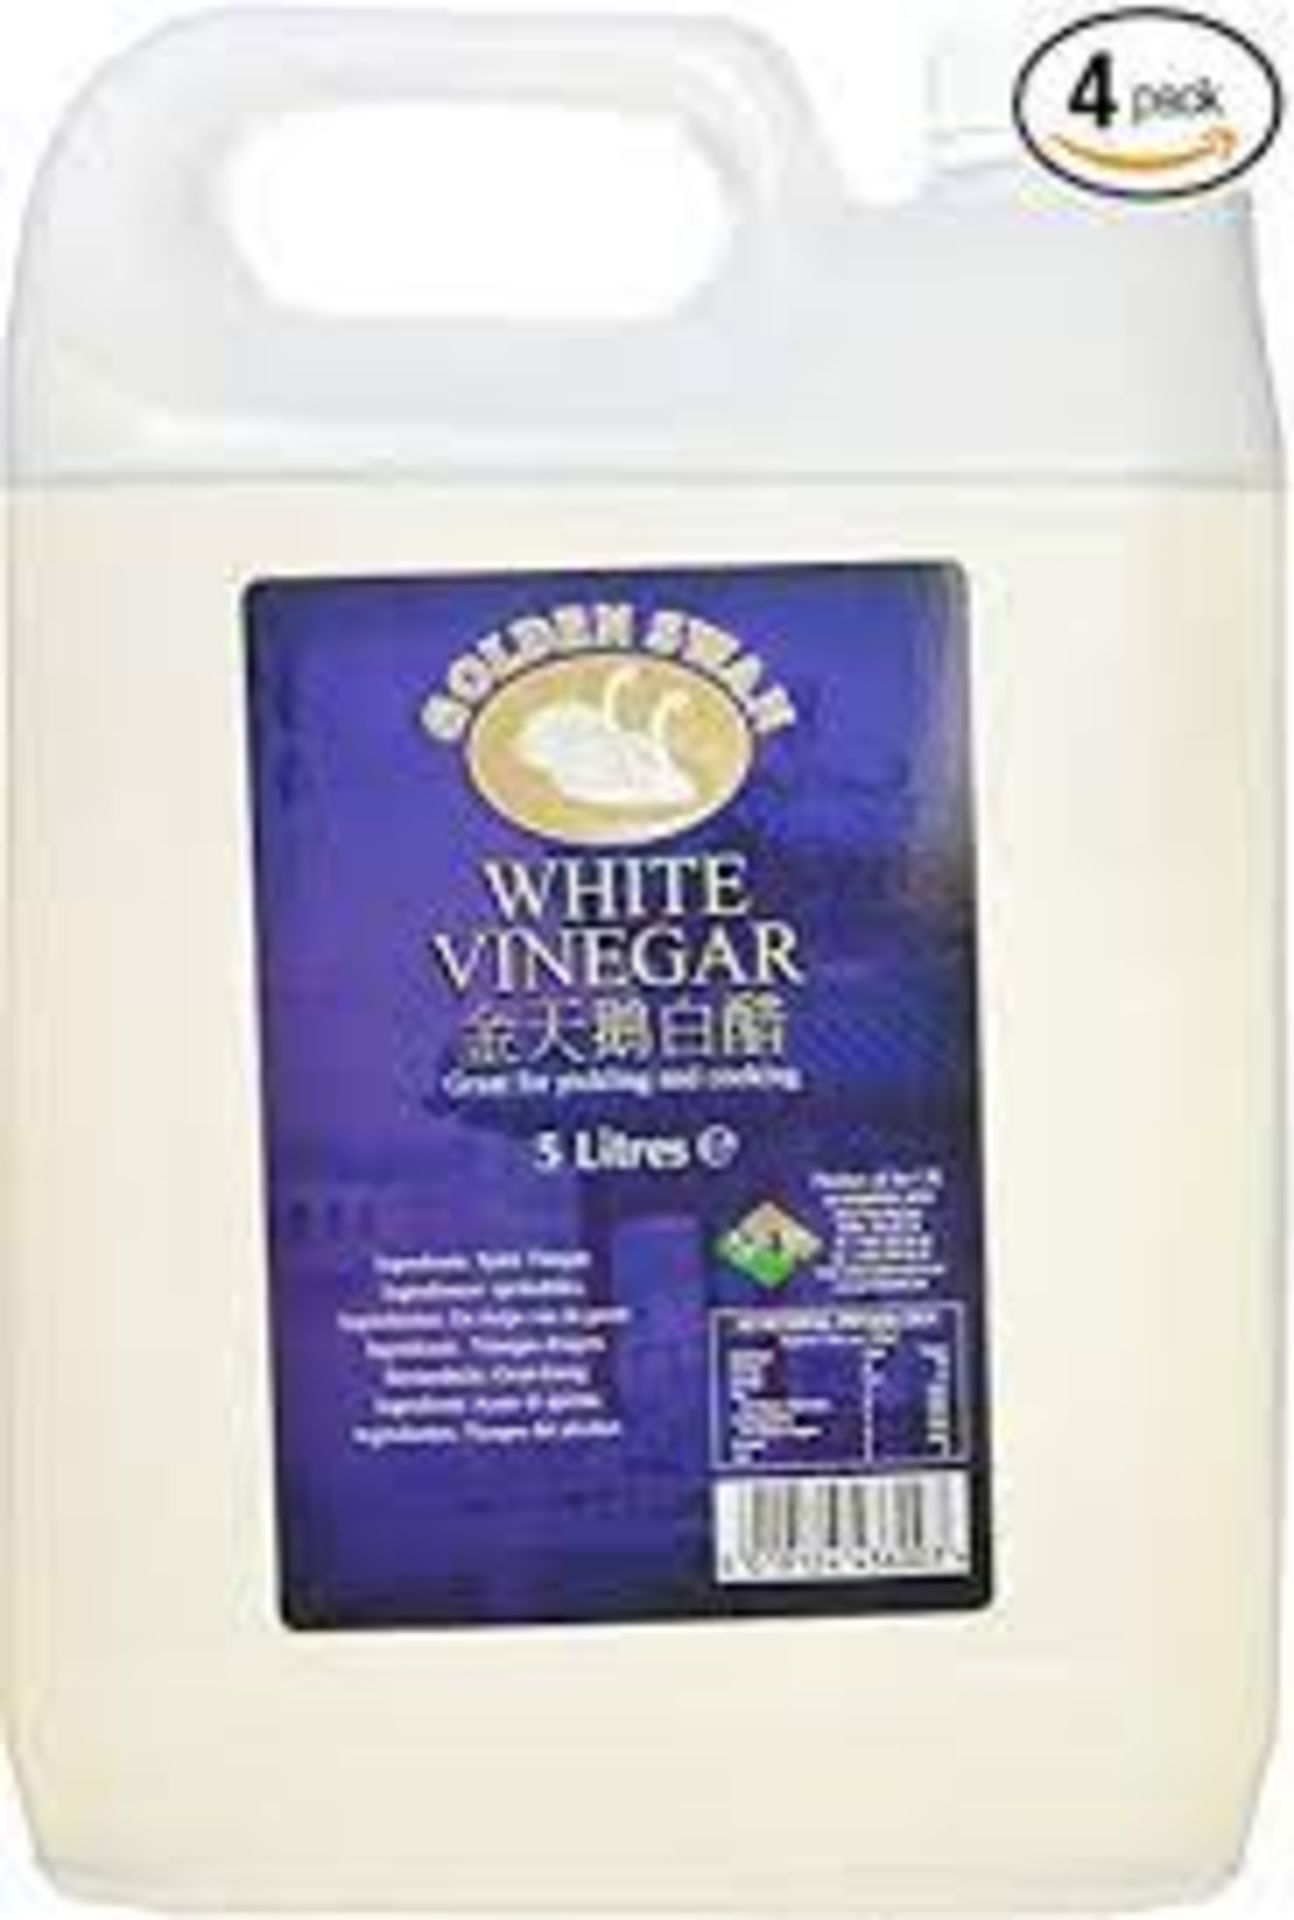 RRP £554 (Approx. Count 68) spW48Y3227K (2) 16 x Golden Swan White Vinegar for Cleaning, Pickling,